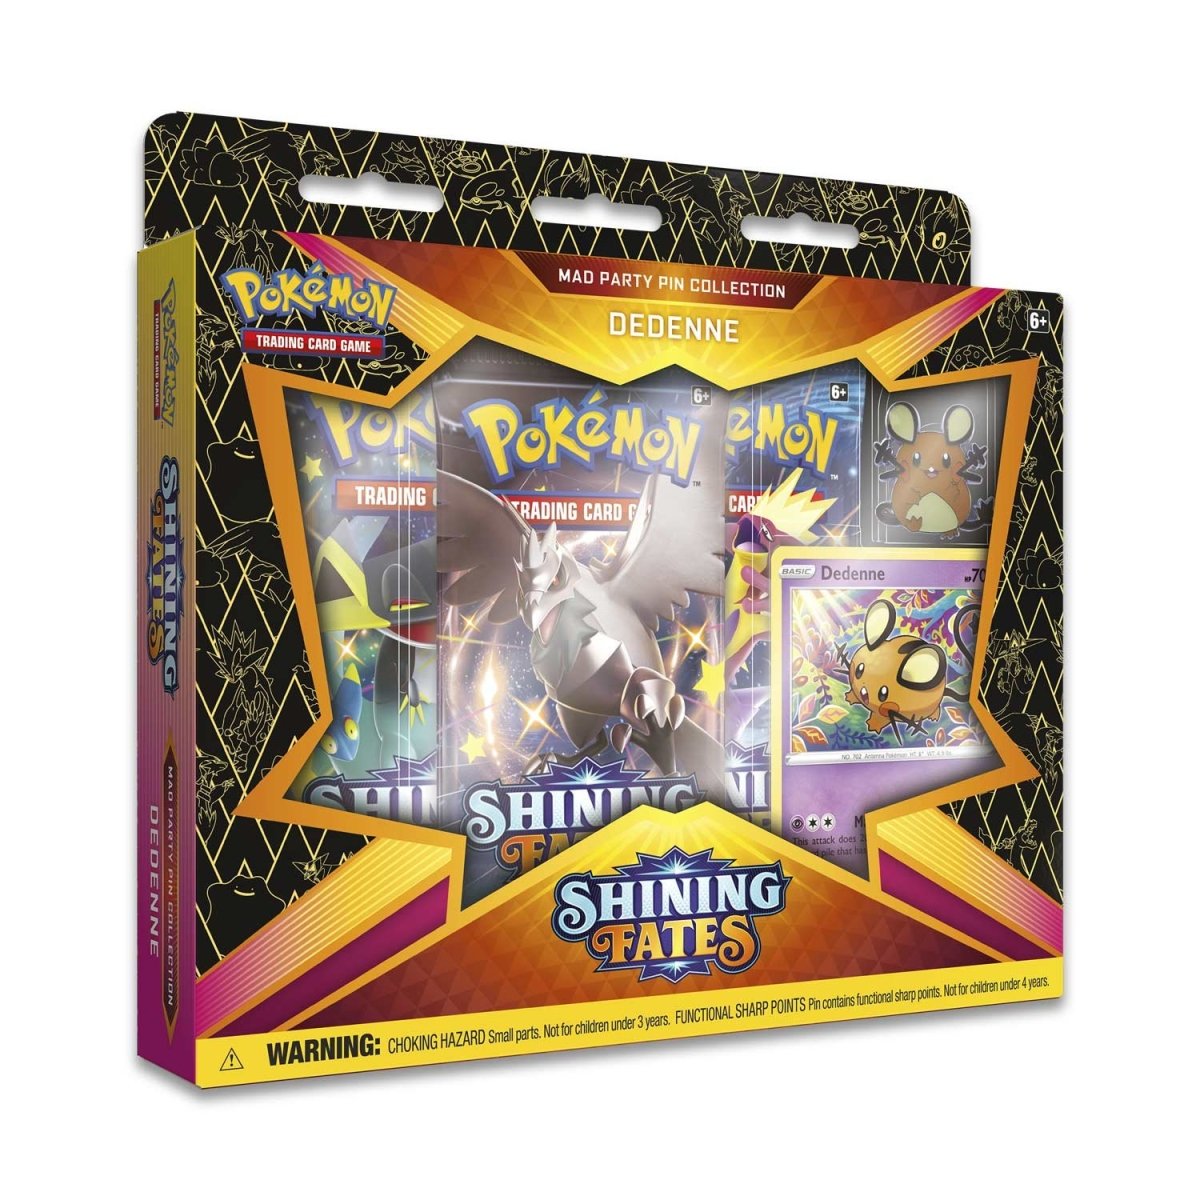 Pokémon TCG: Shining Fates Mad Party Pin Collection (Dedenne)